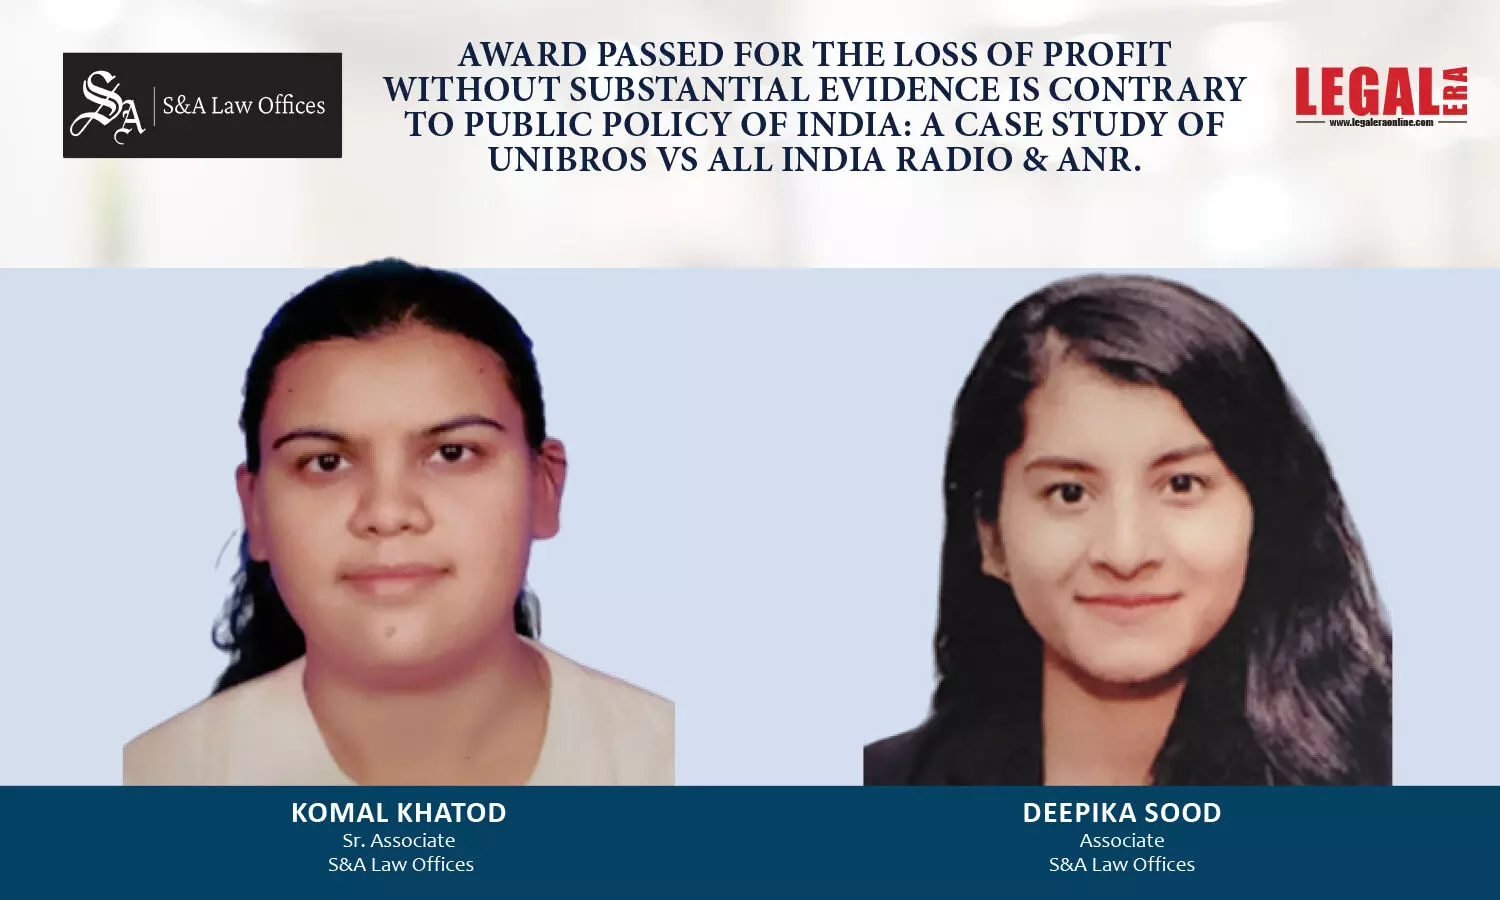 Award Passed For The Loss Of Profit Without Substantial Evidence Is Contrary To Public Policy Of India: A Case Study Of Unibros Vs All India Radio & Anr.